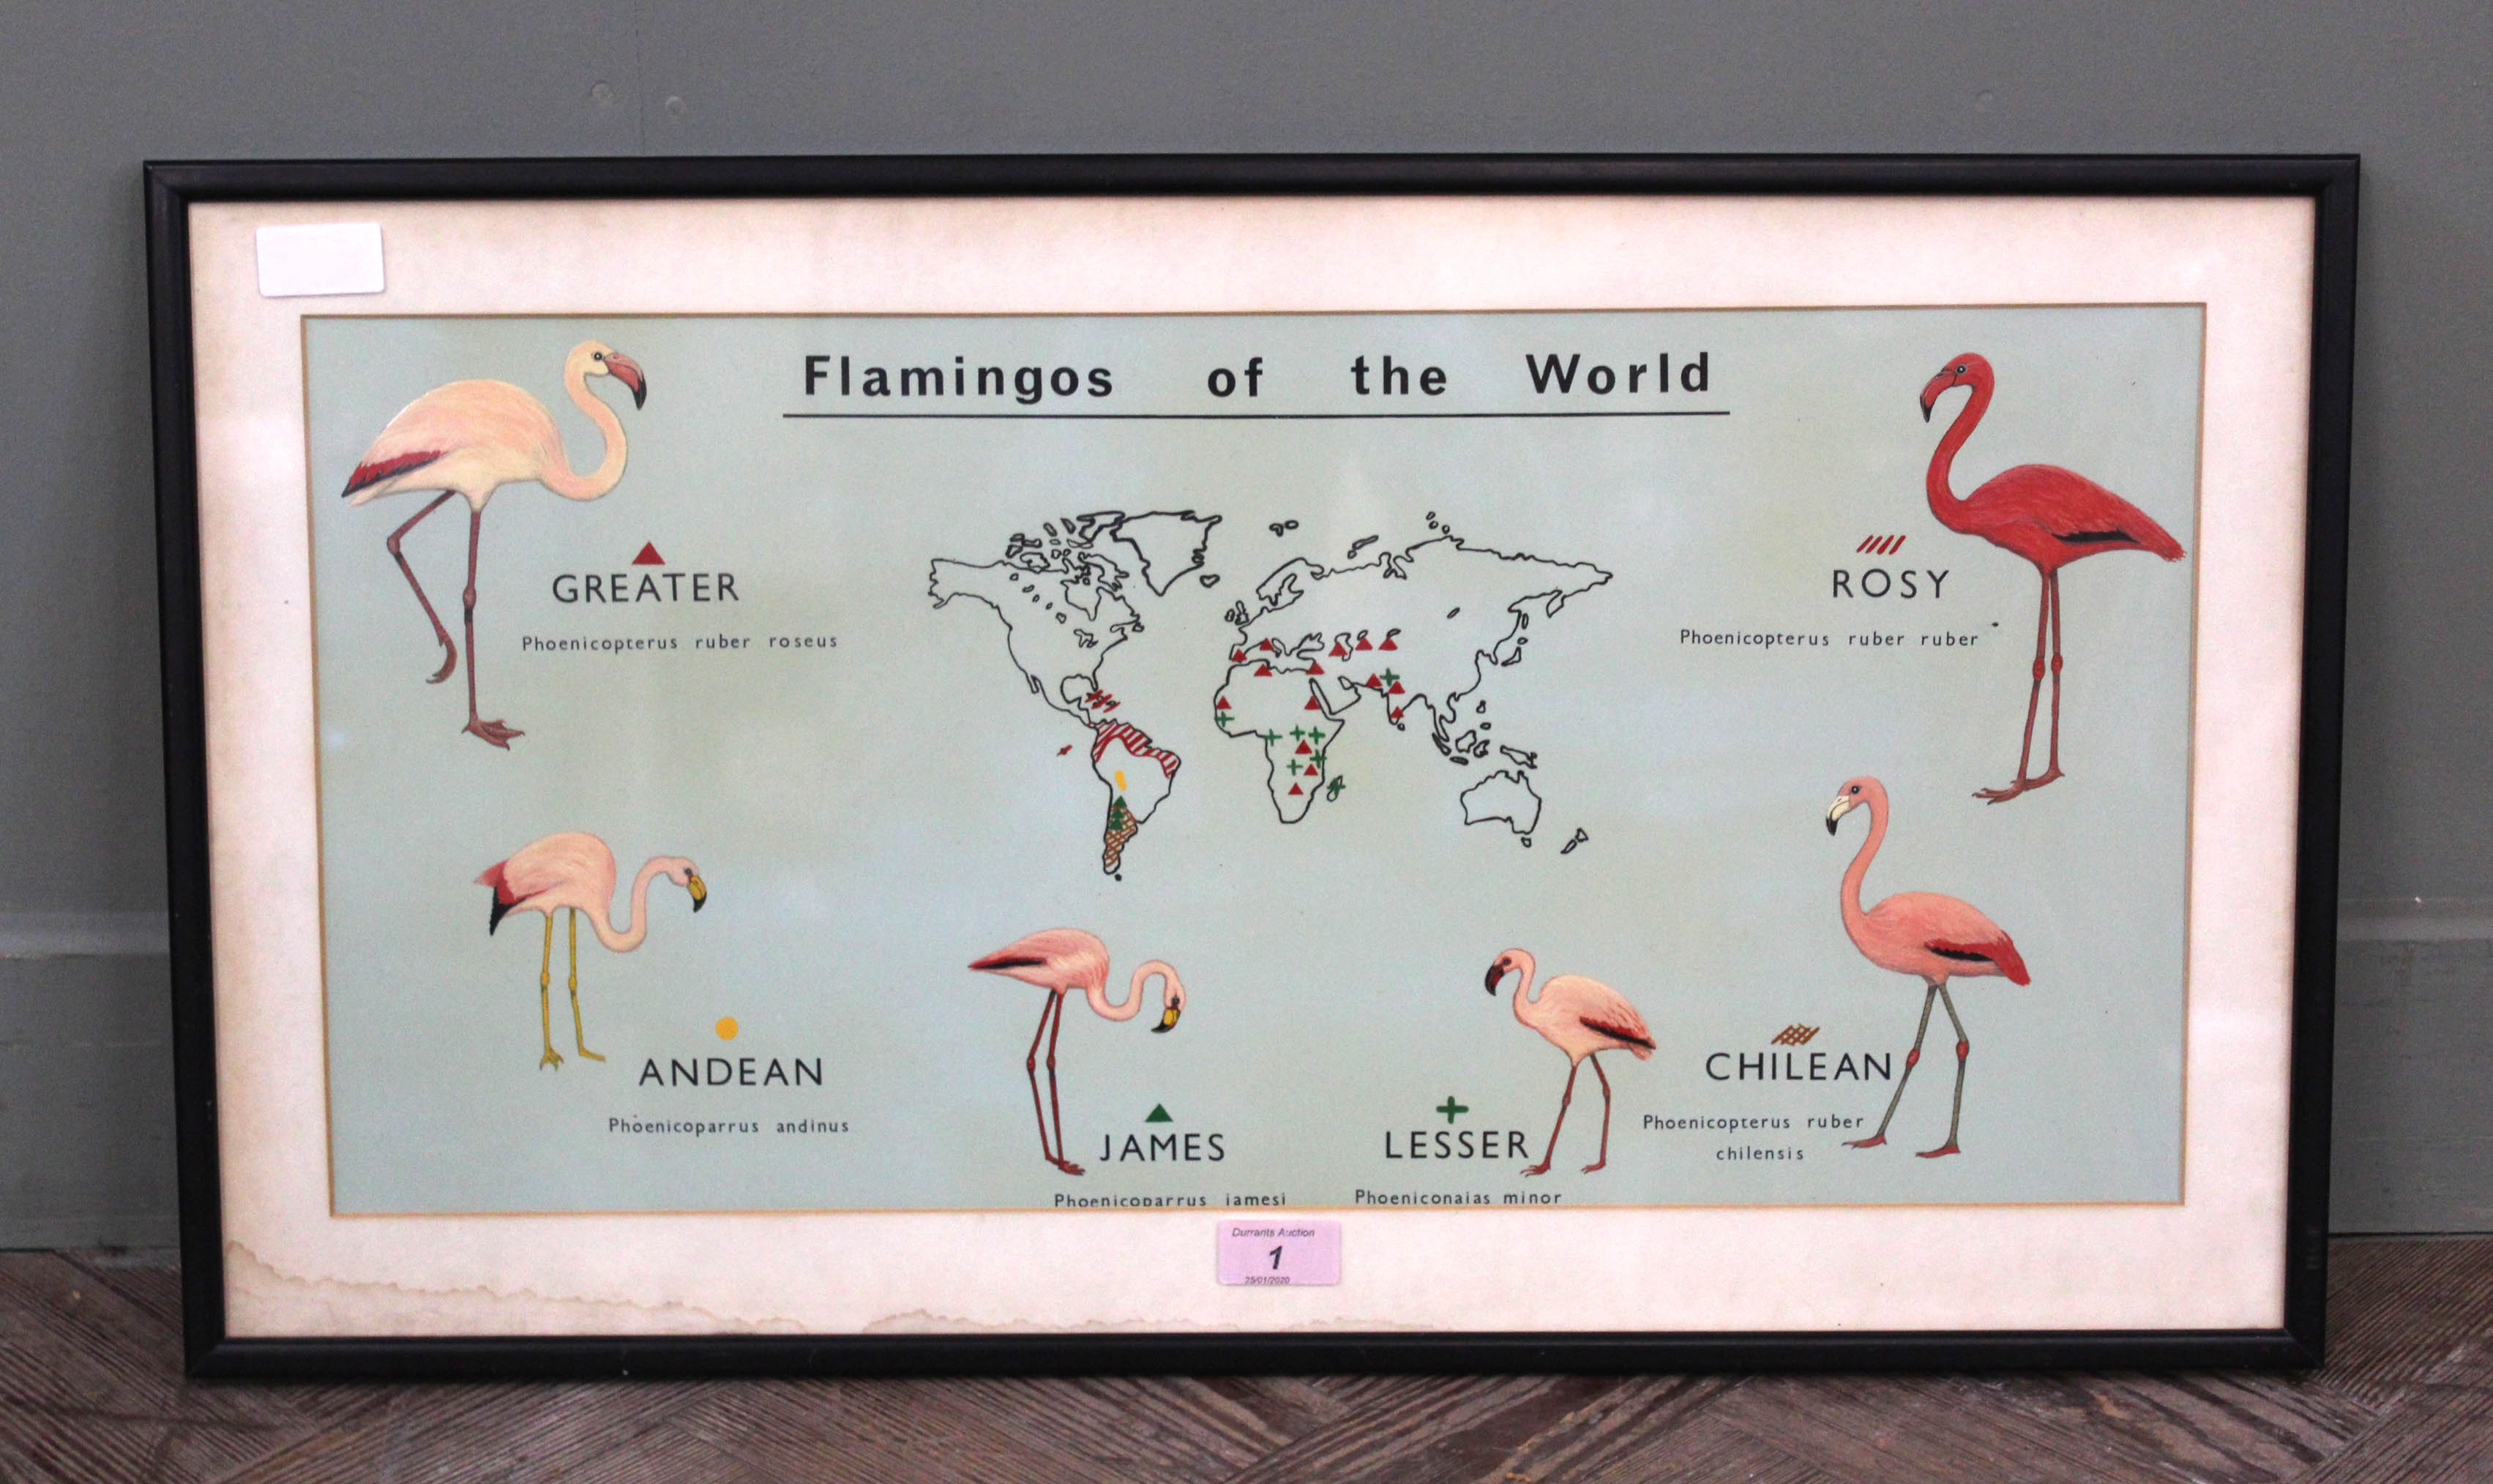 A framed picture depicting Flamingos of the World - Image 2 of 2